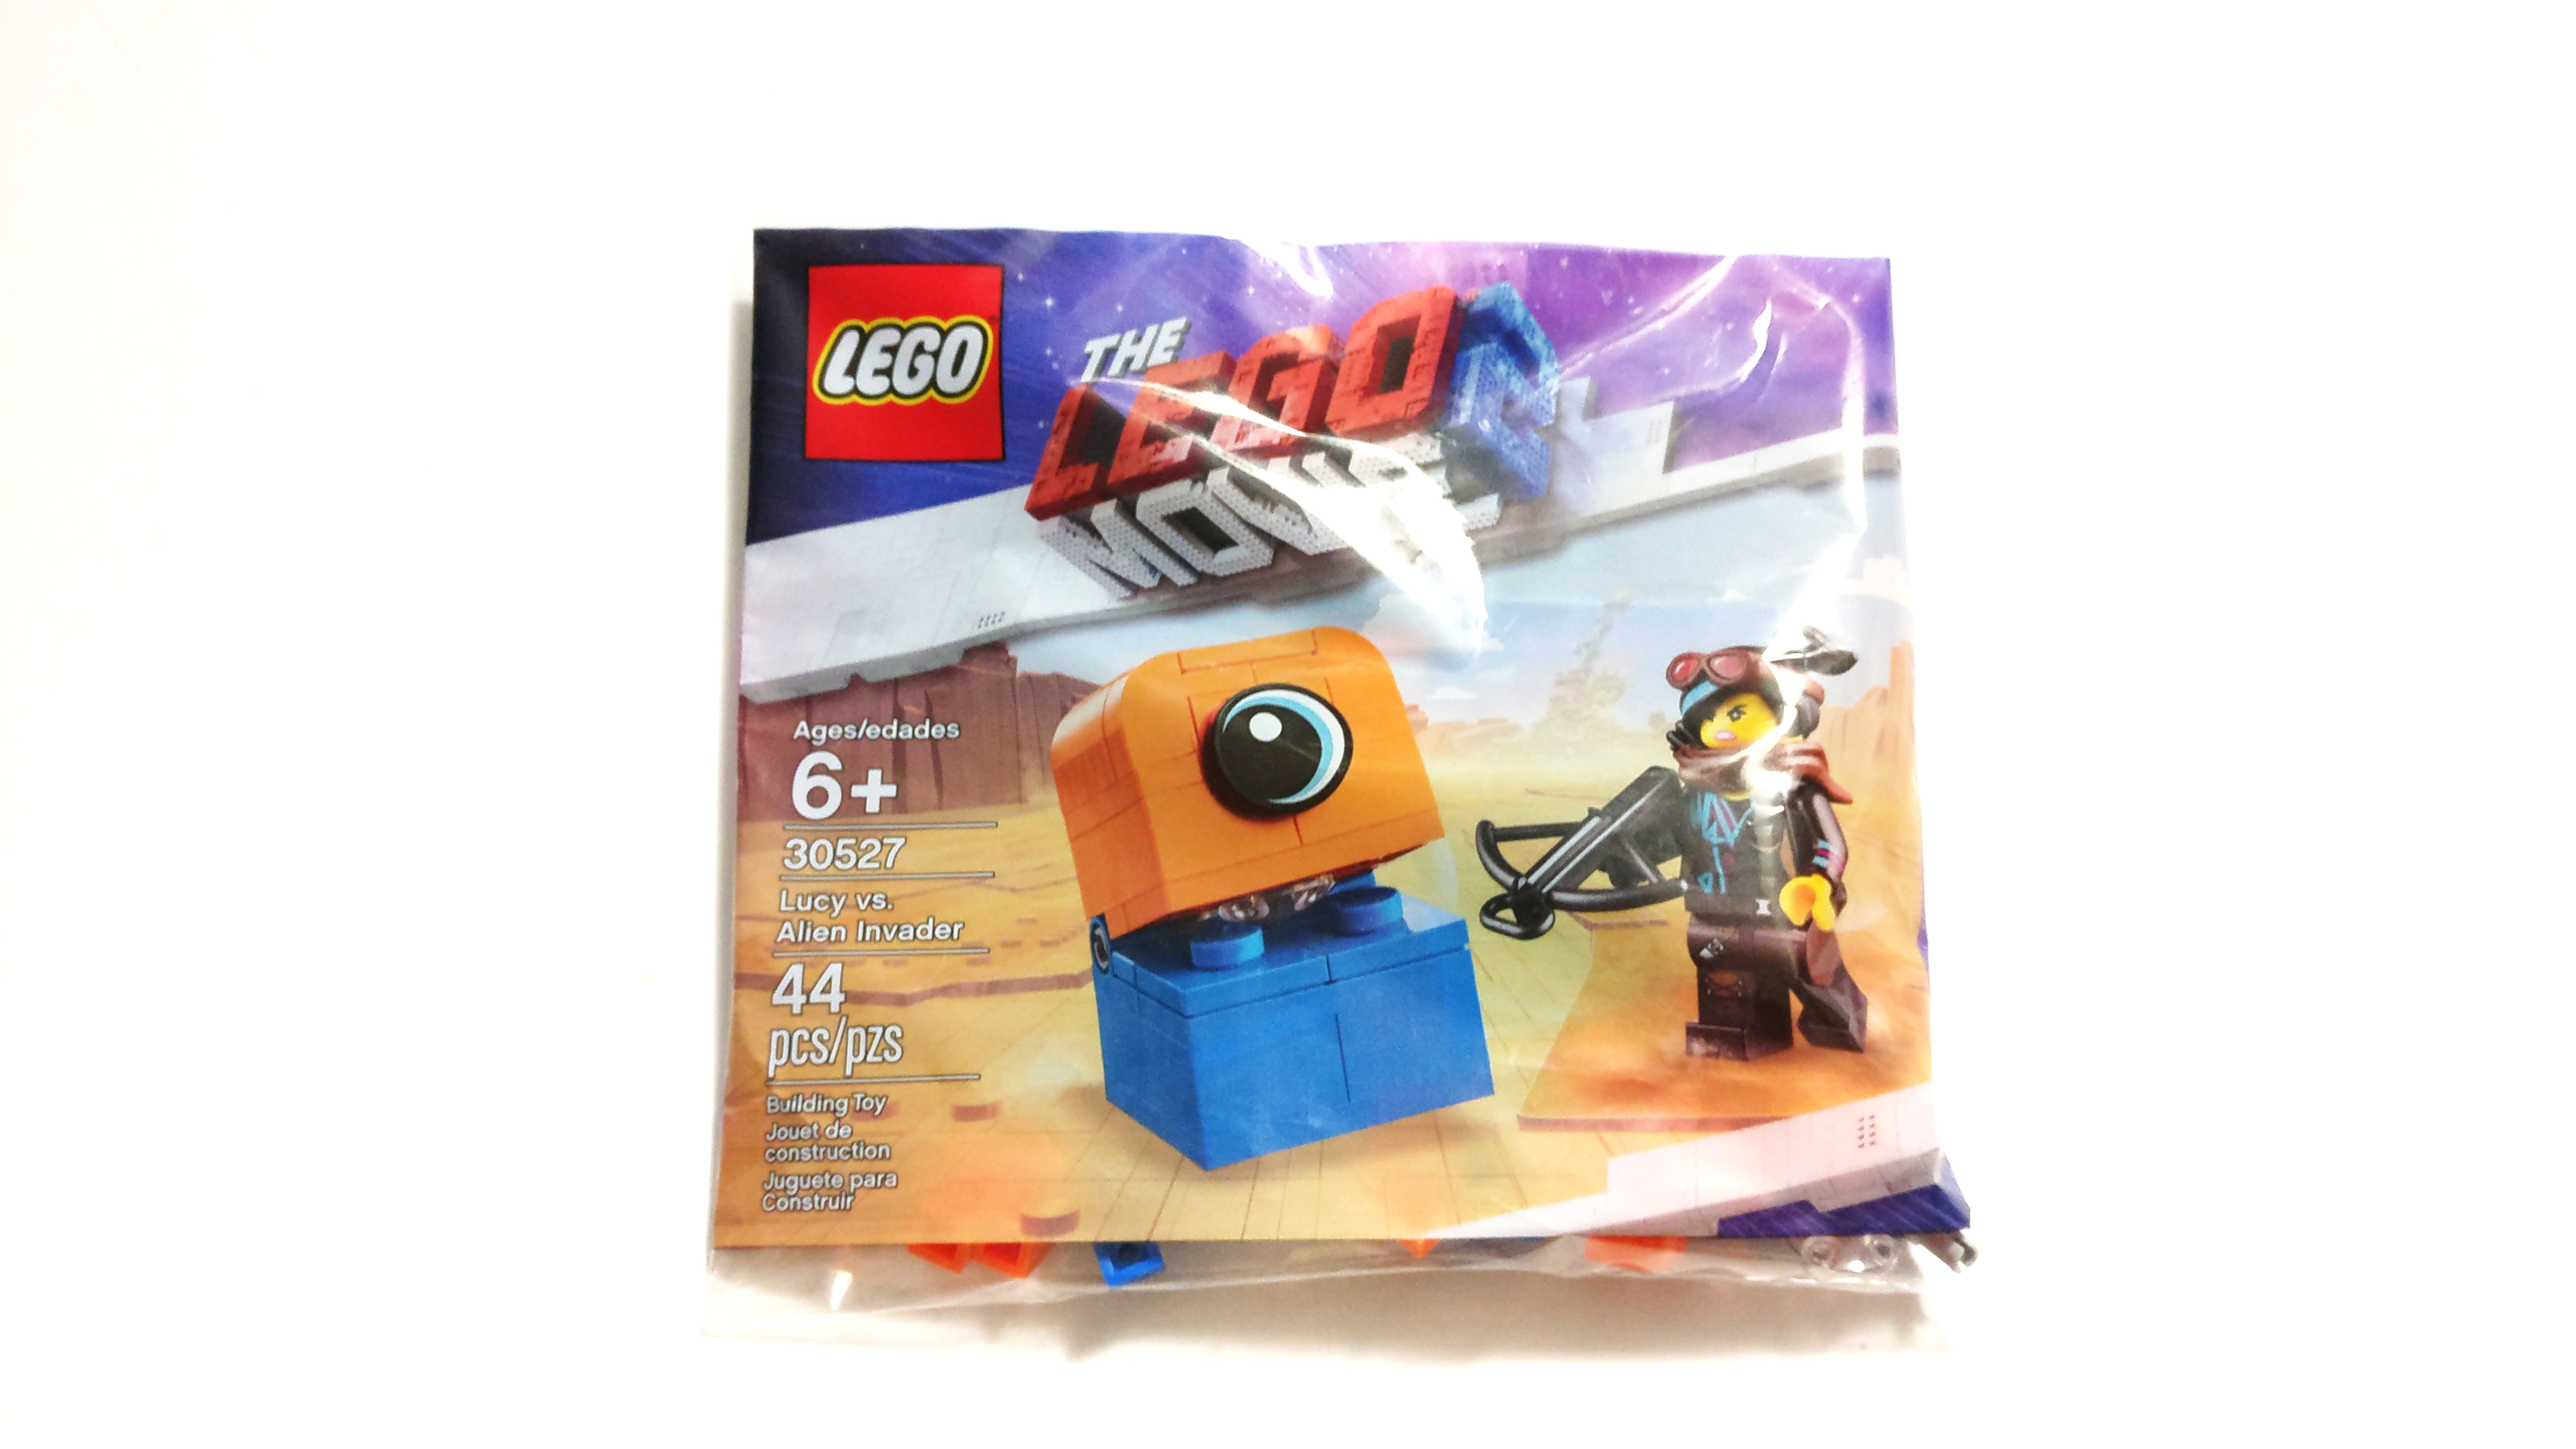 Alien Invader polybag 2019 NEW/SEALED The LEGO Movie 2 NEW 30527 Lucy Vs 